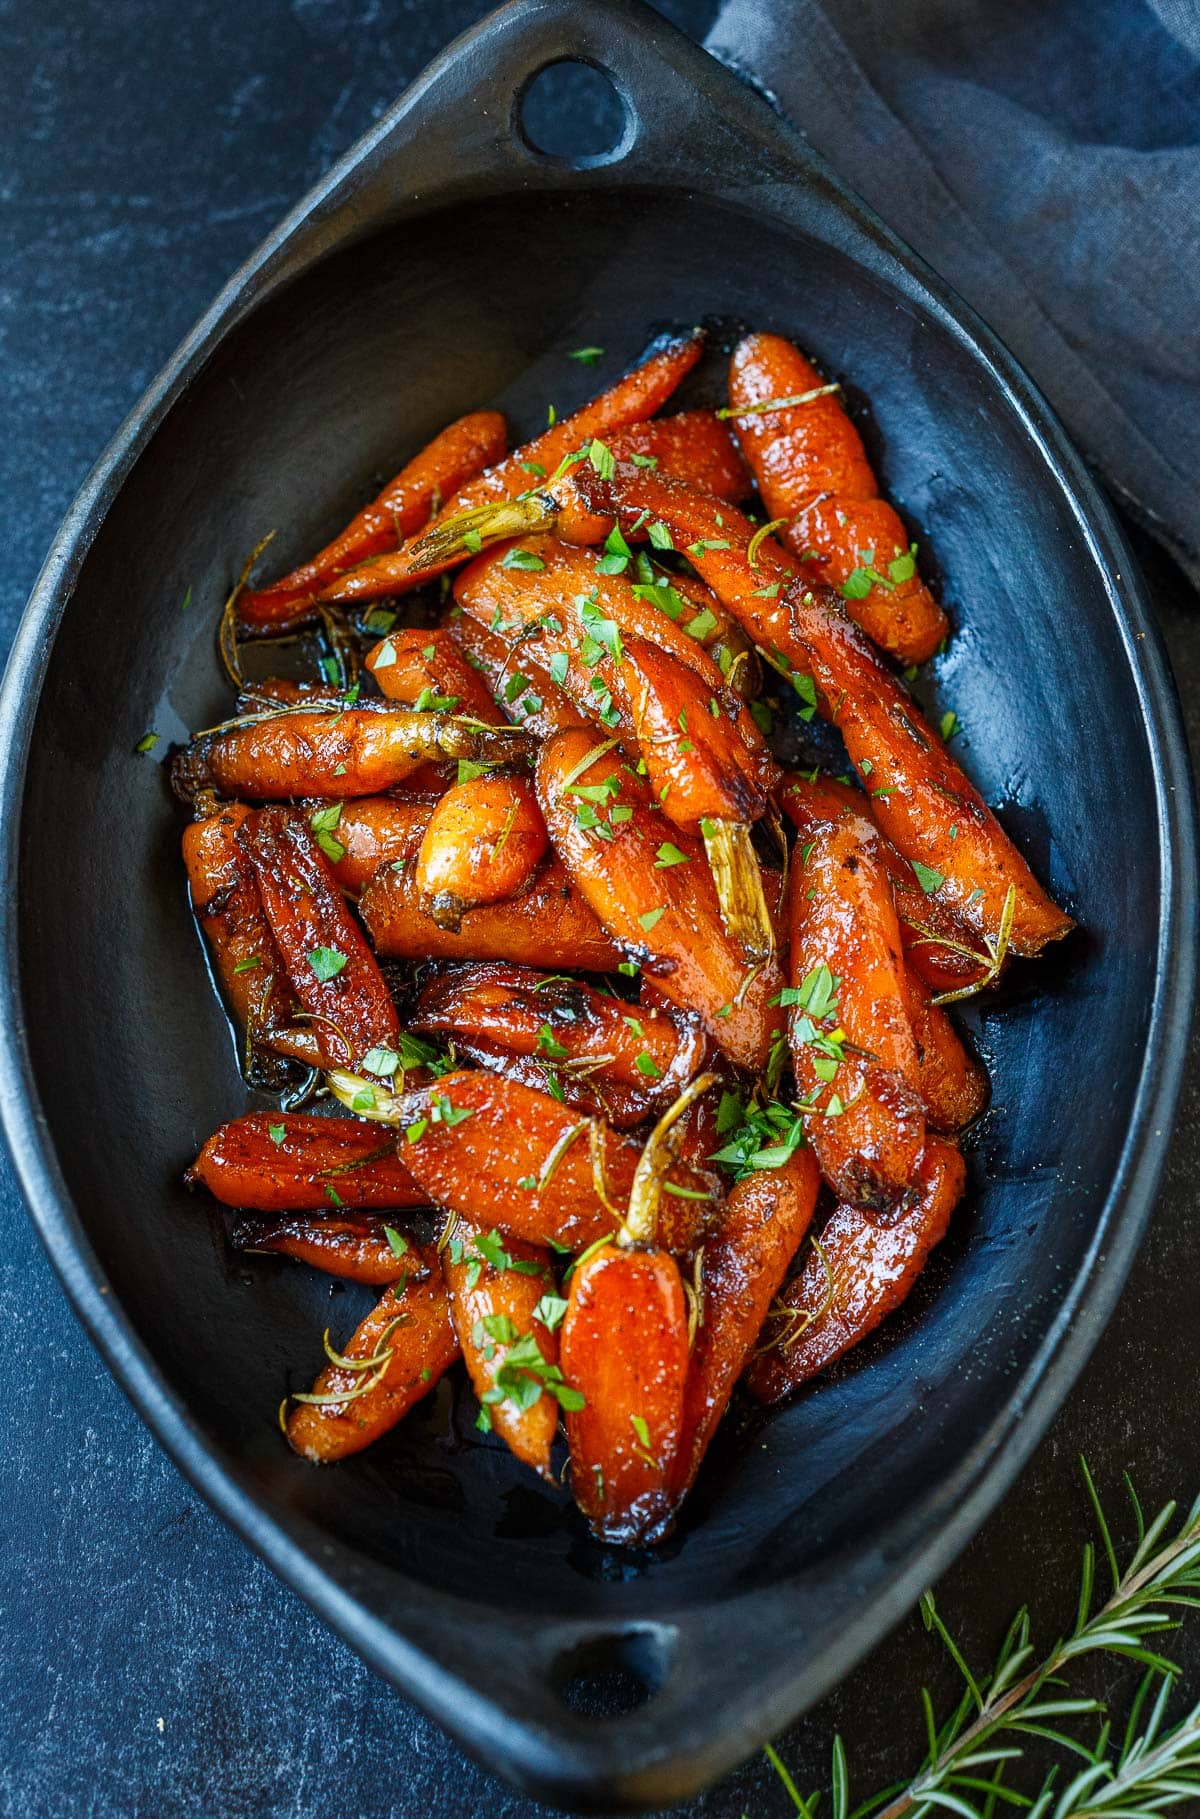 Glazed carrots in a serving dish